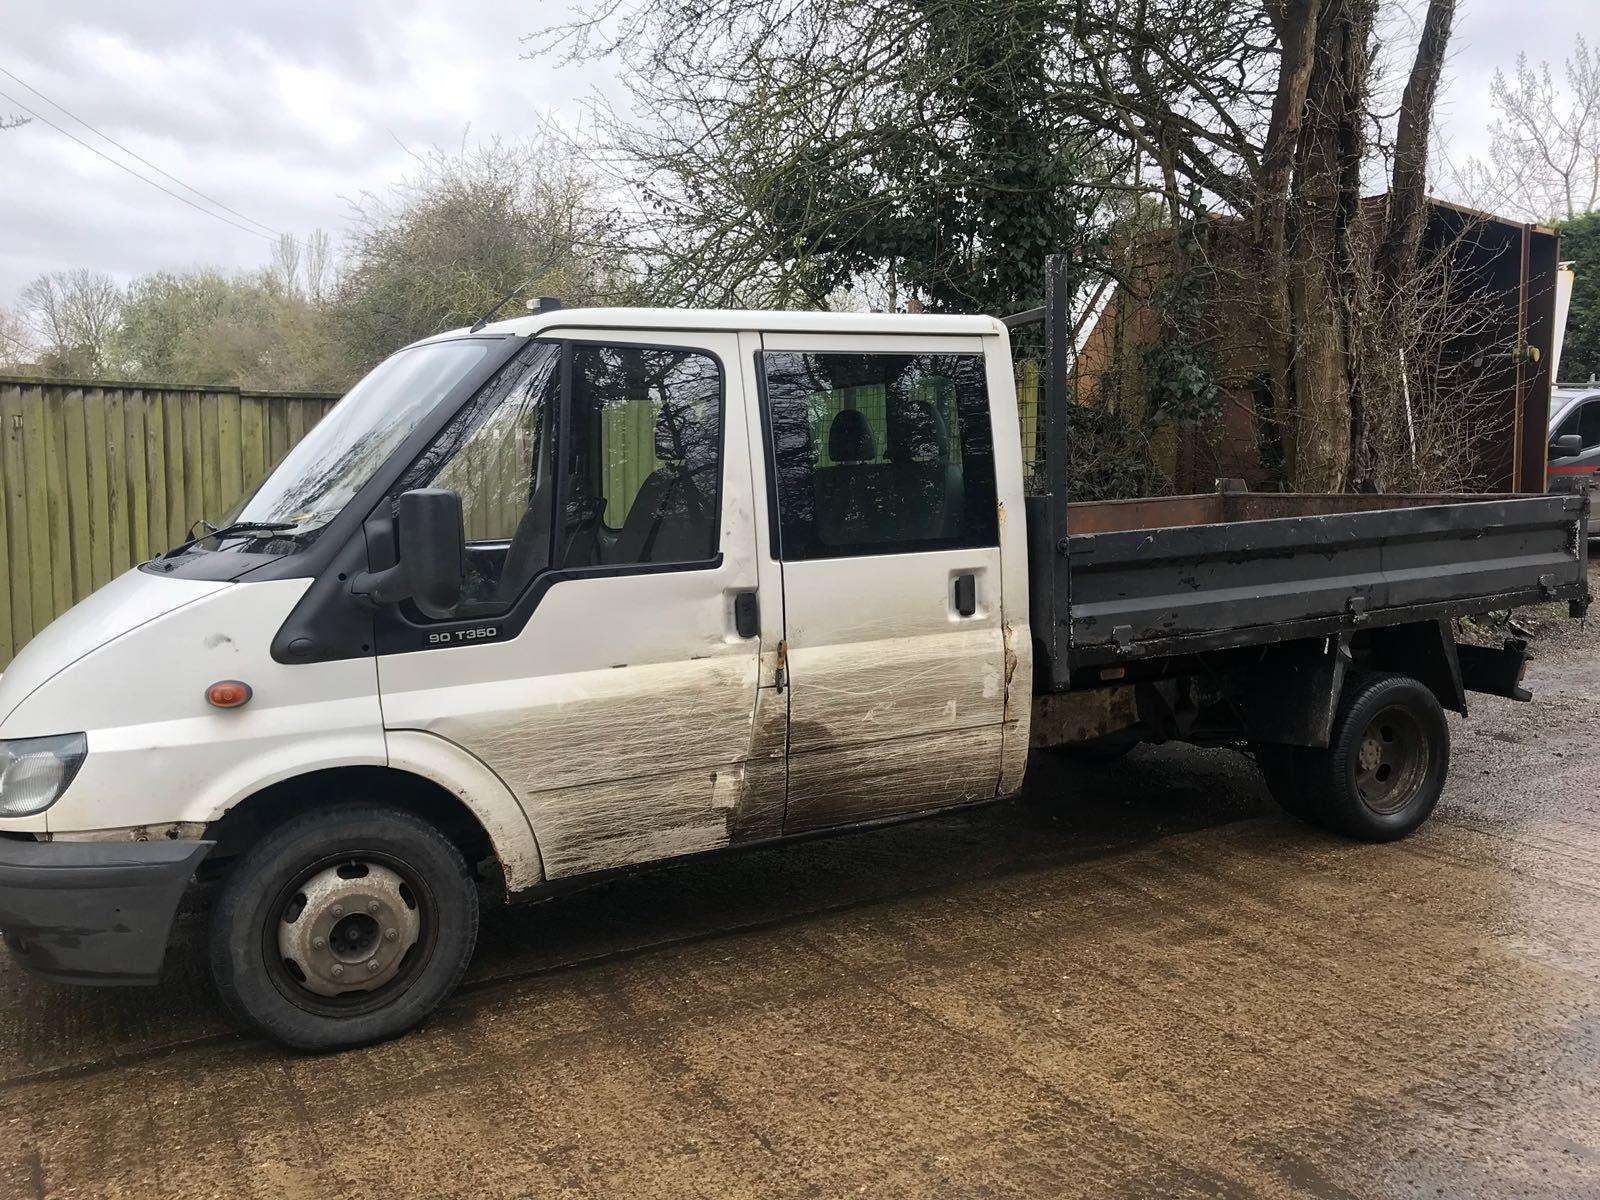 The Ford Transit was seized near Old Hay. (1389741)